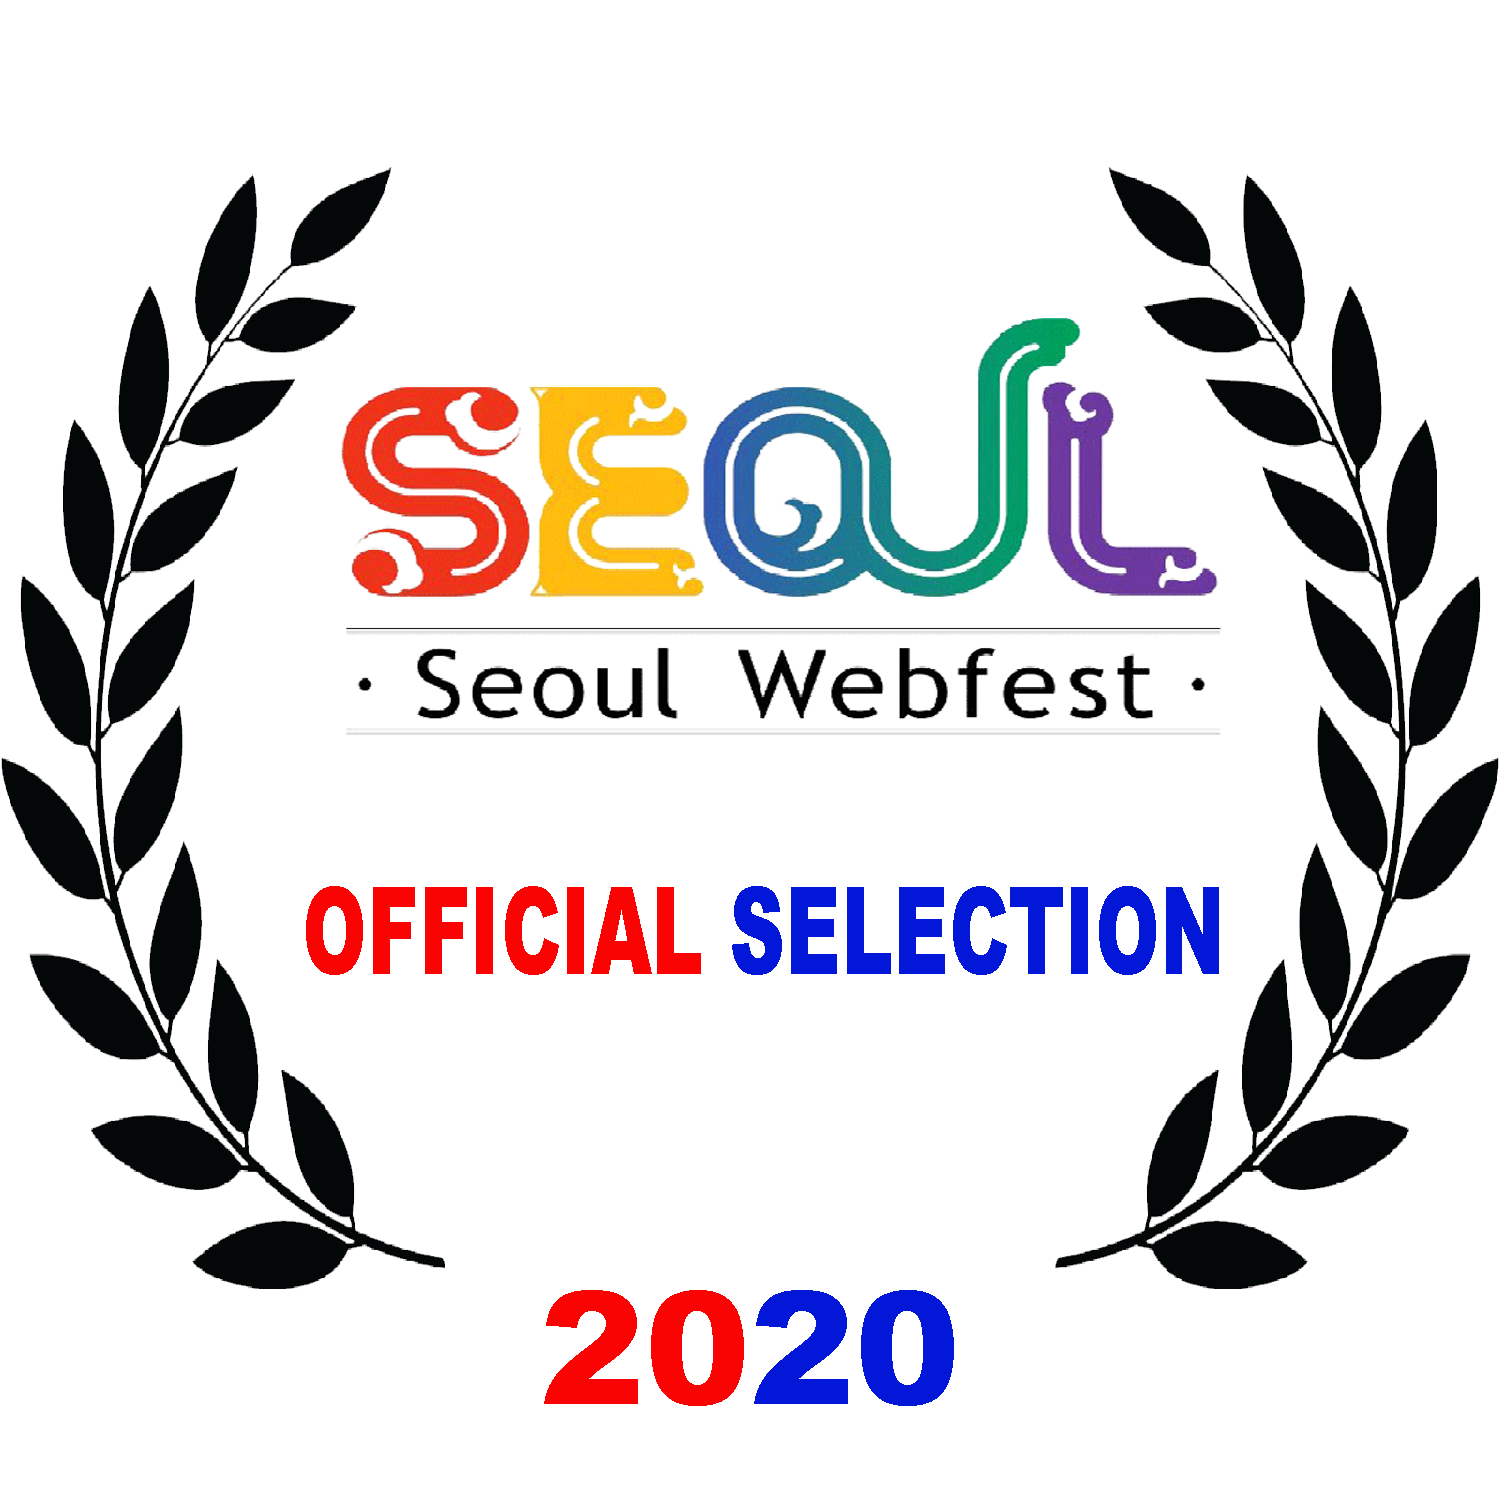 SeoulWebfest_OfficialSelection_2020 (1).png